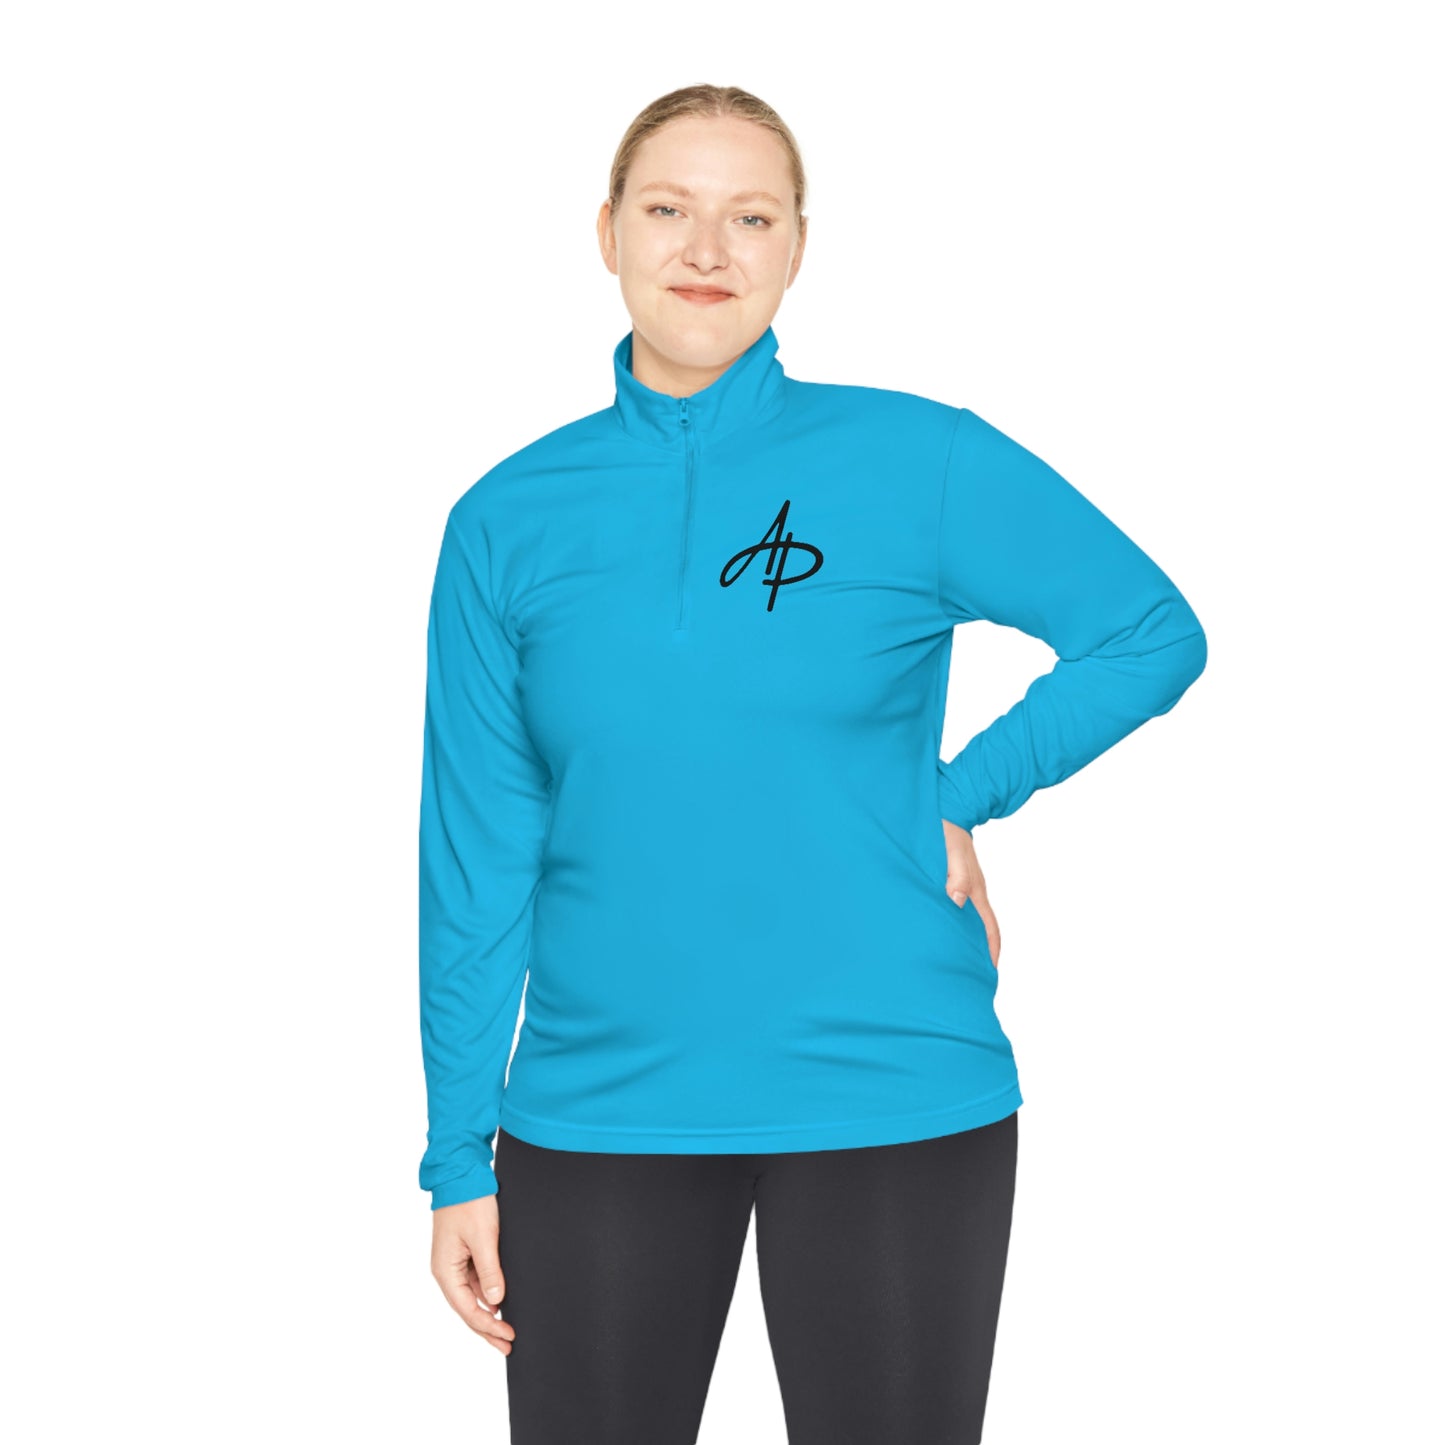 Official Advanced Performance Pause Commit Rise Pullover